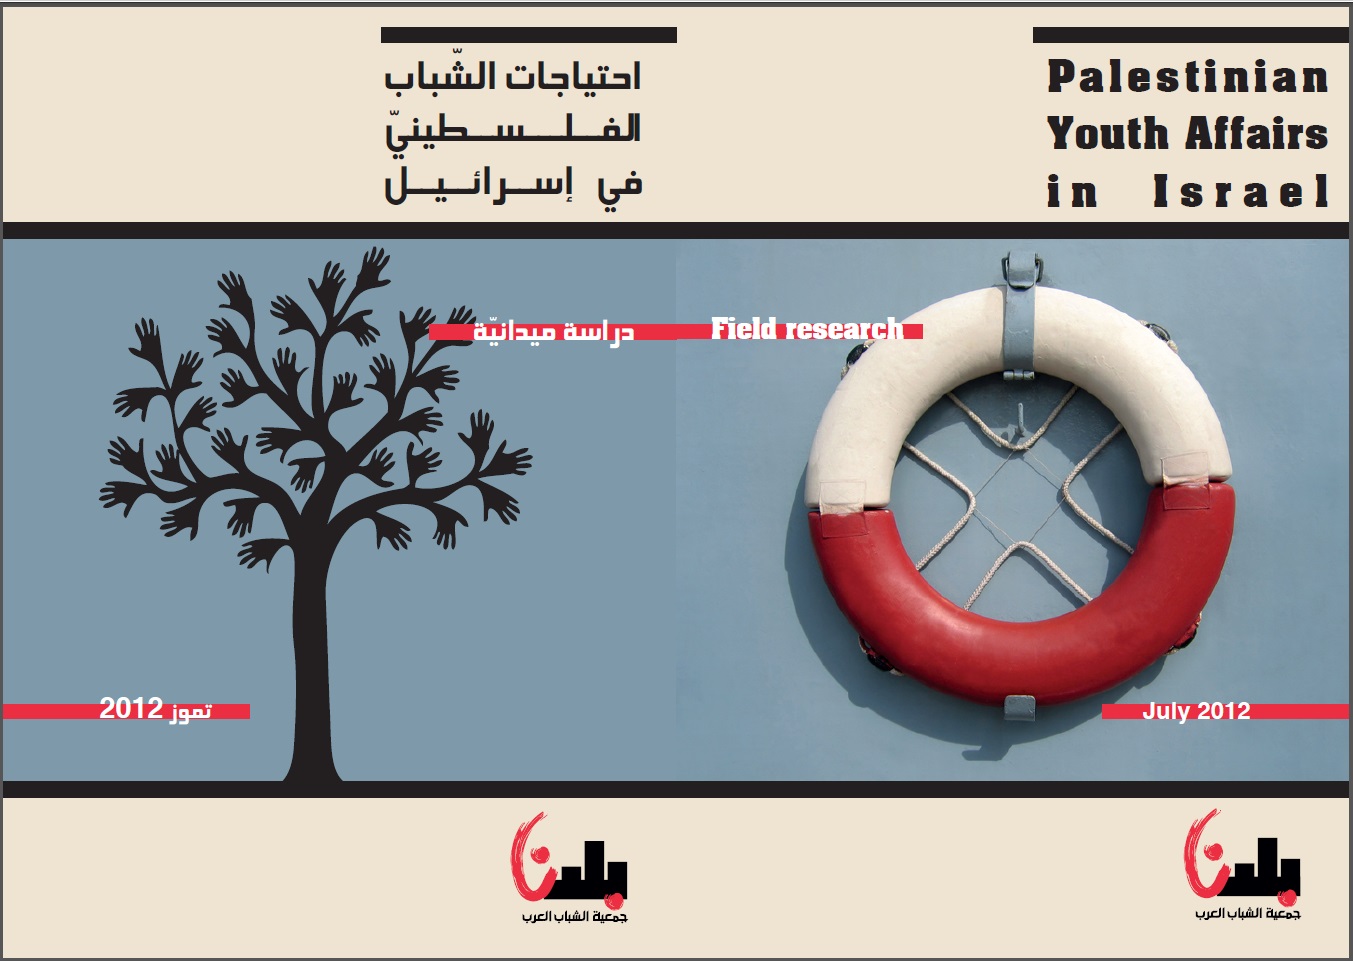 Baladna new book :Palestinian Youth Affairs in Israel